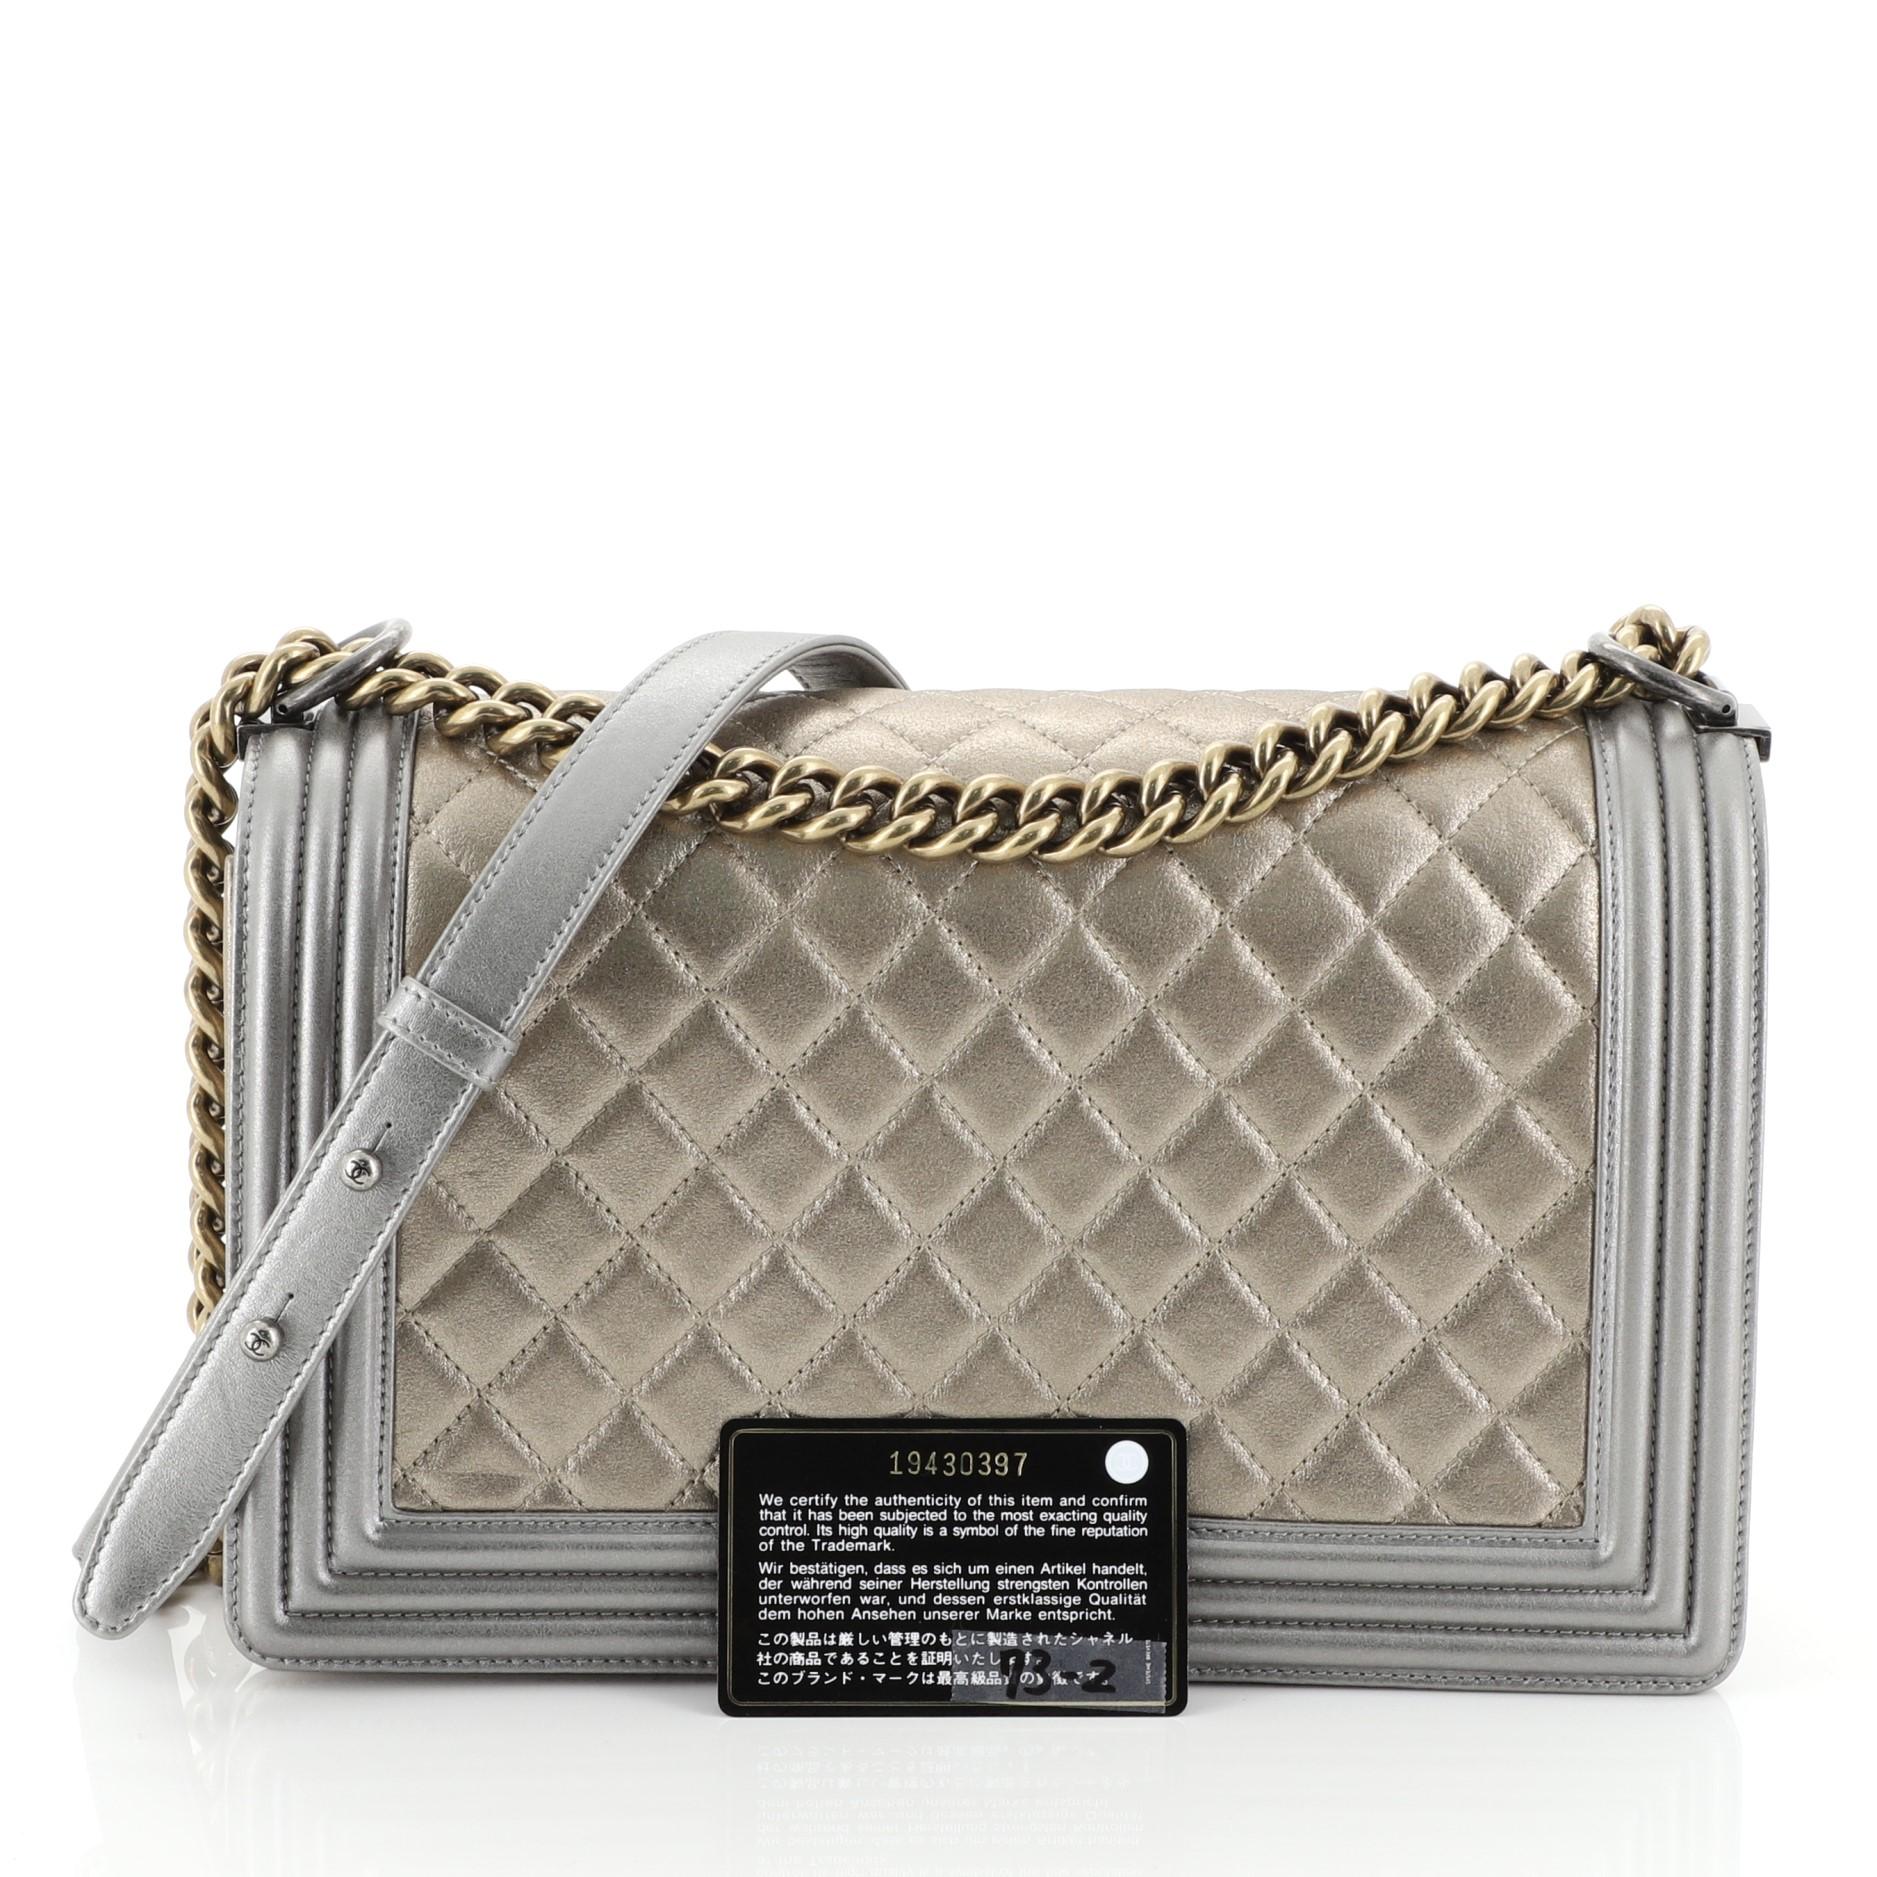 This Chanel Bicolor Boy Flap Bag Quilted Metallic Calfskin New Medium, crafted in gray and neutral quilted metallic calfskin leather, features chain link strap with leather pad and gold-tone hardware. Its CC logo boy push-lock closure opens to a